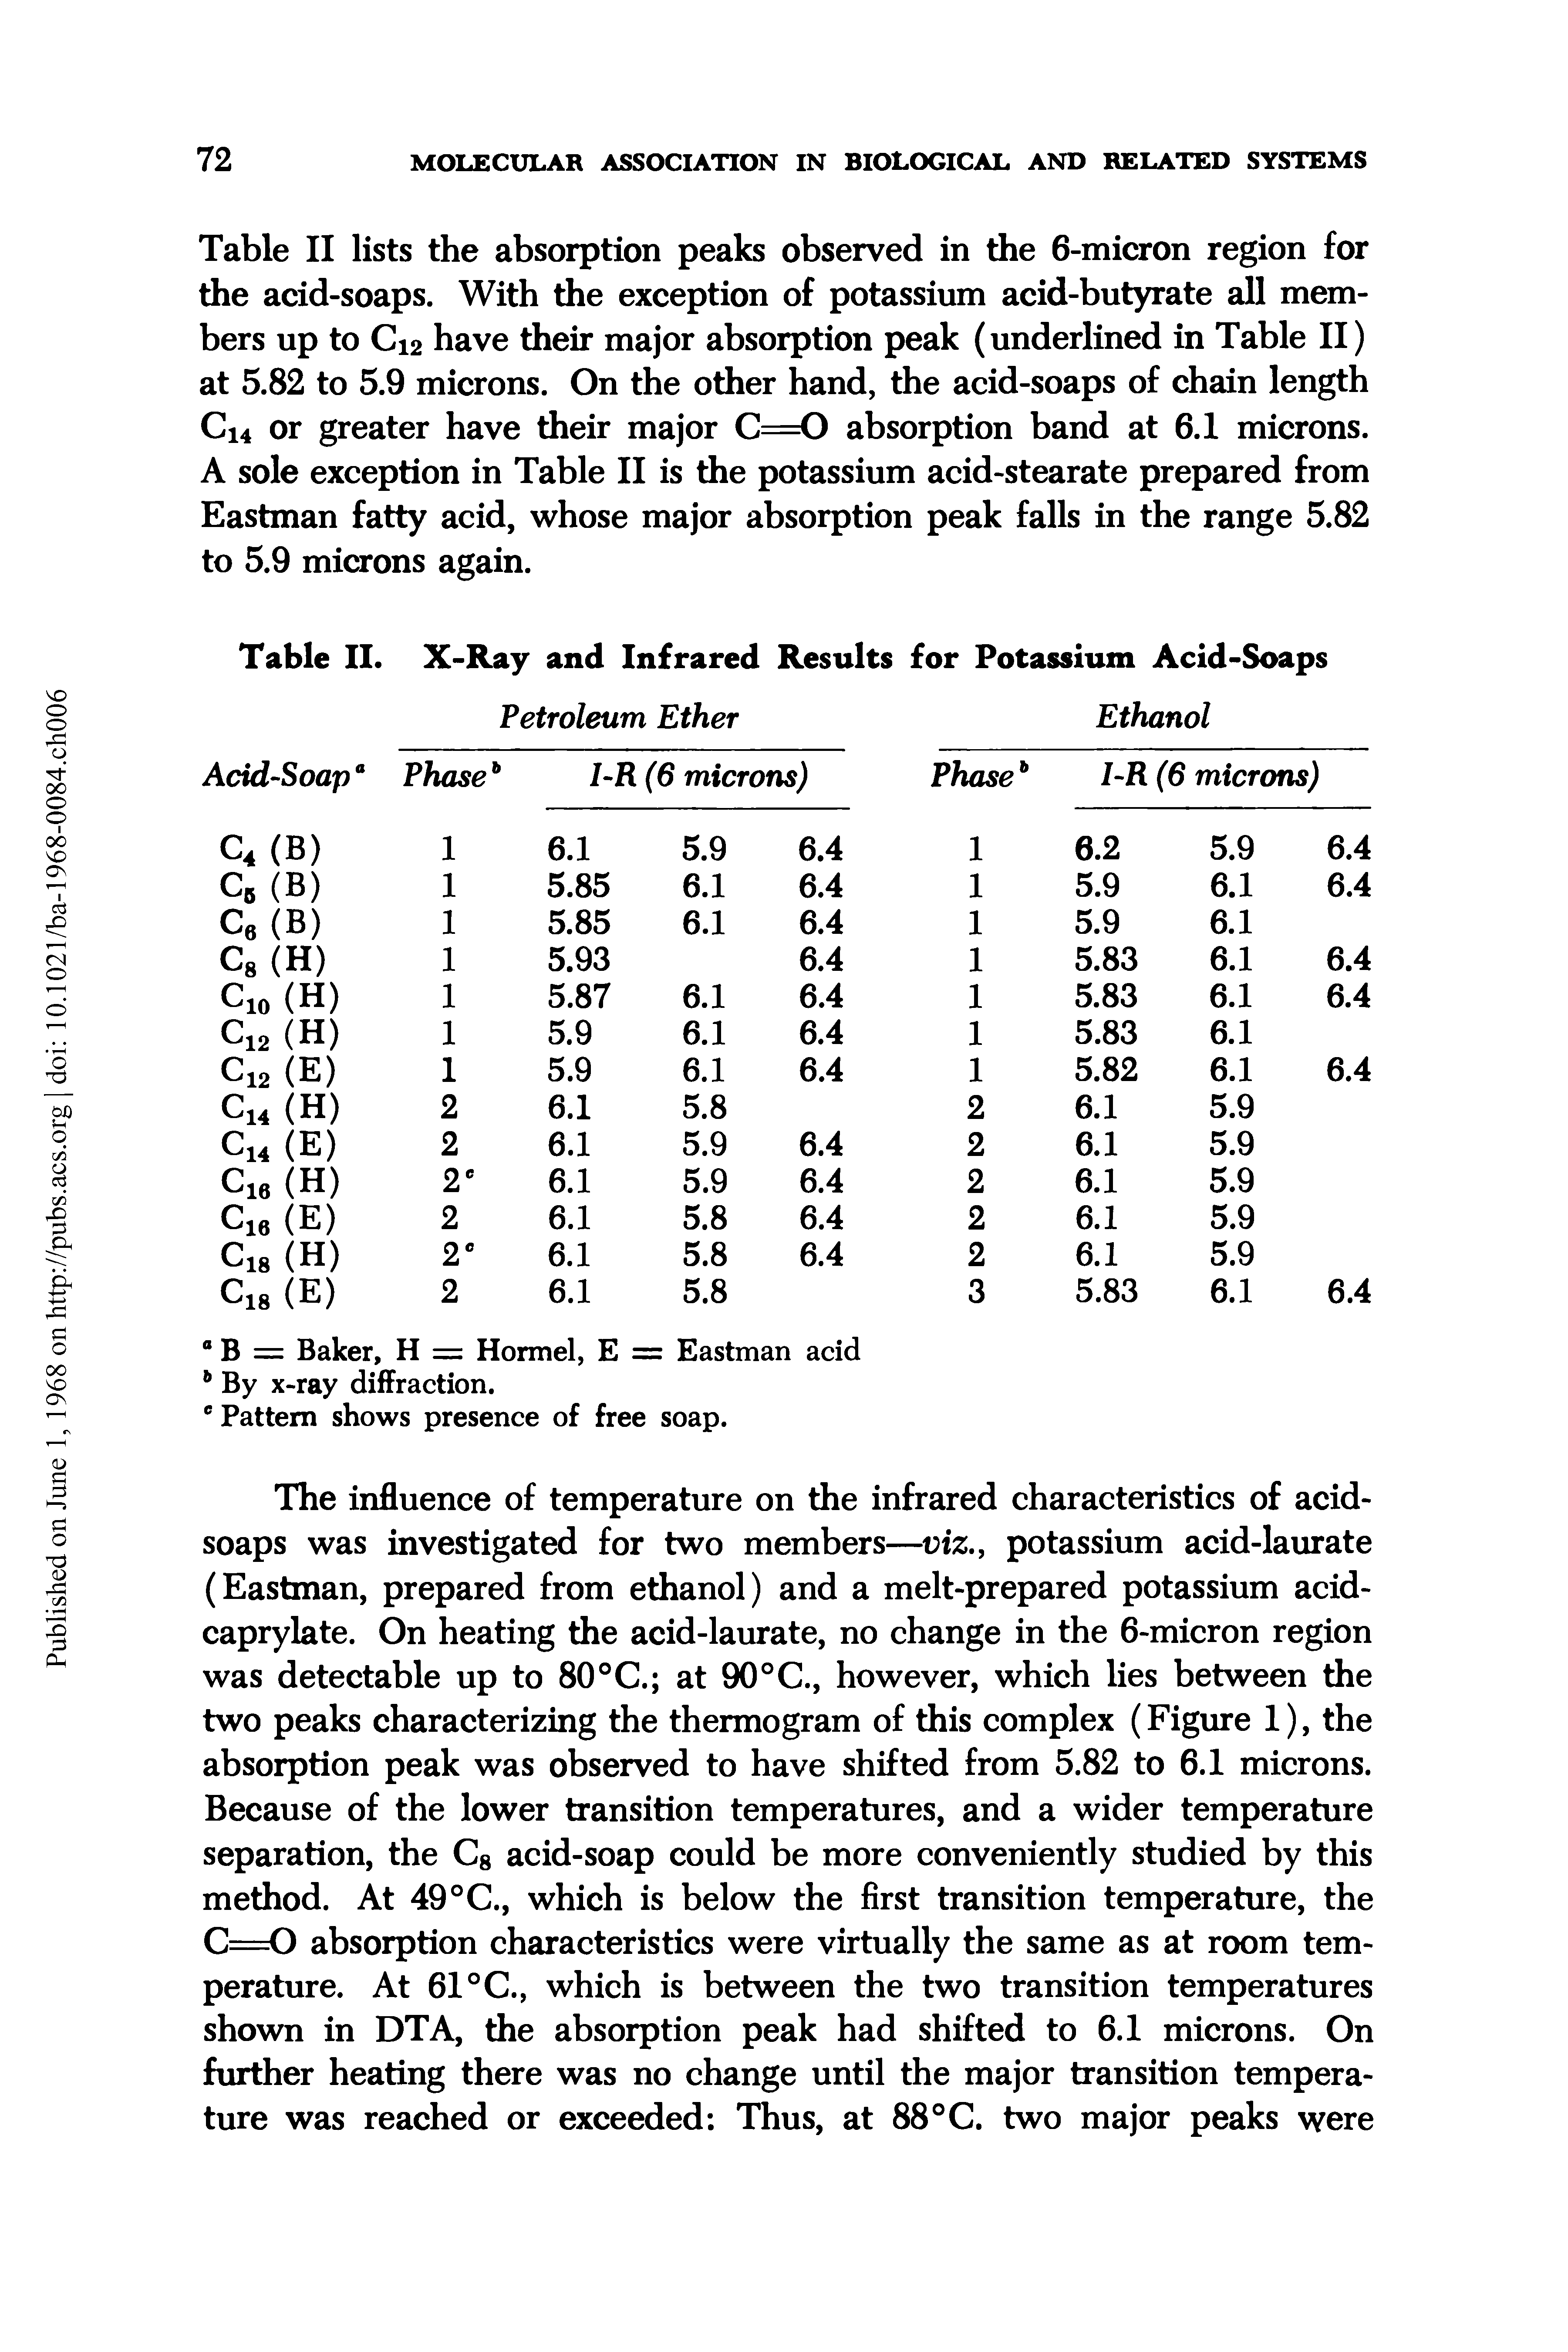 Table II lists the absorption peaks observed in the 6-micron region for the acid-soaps. With the exception of potassium acid-butyrate all members up to Ci2 have their major absorption peak (underlined in Table II) at 5.82 to 5.9 microns. On the other hand, the acid-soaps of chain length Ci4 or greater have their major C=0 absorption band at 6.1 microns. A sole exception in Table II is the potassium acid-stearate prepared from Eastman fatty acid, whose major absorption peak falls in the range 5.82 to 5.9 microns again.